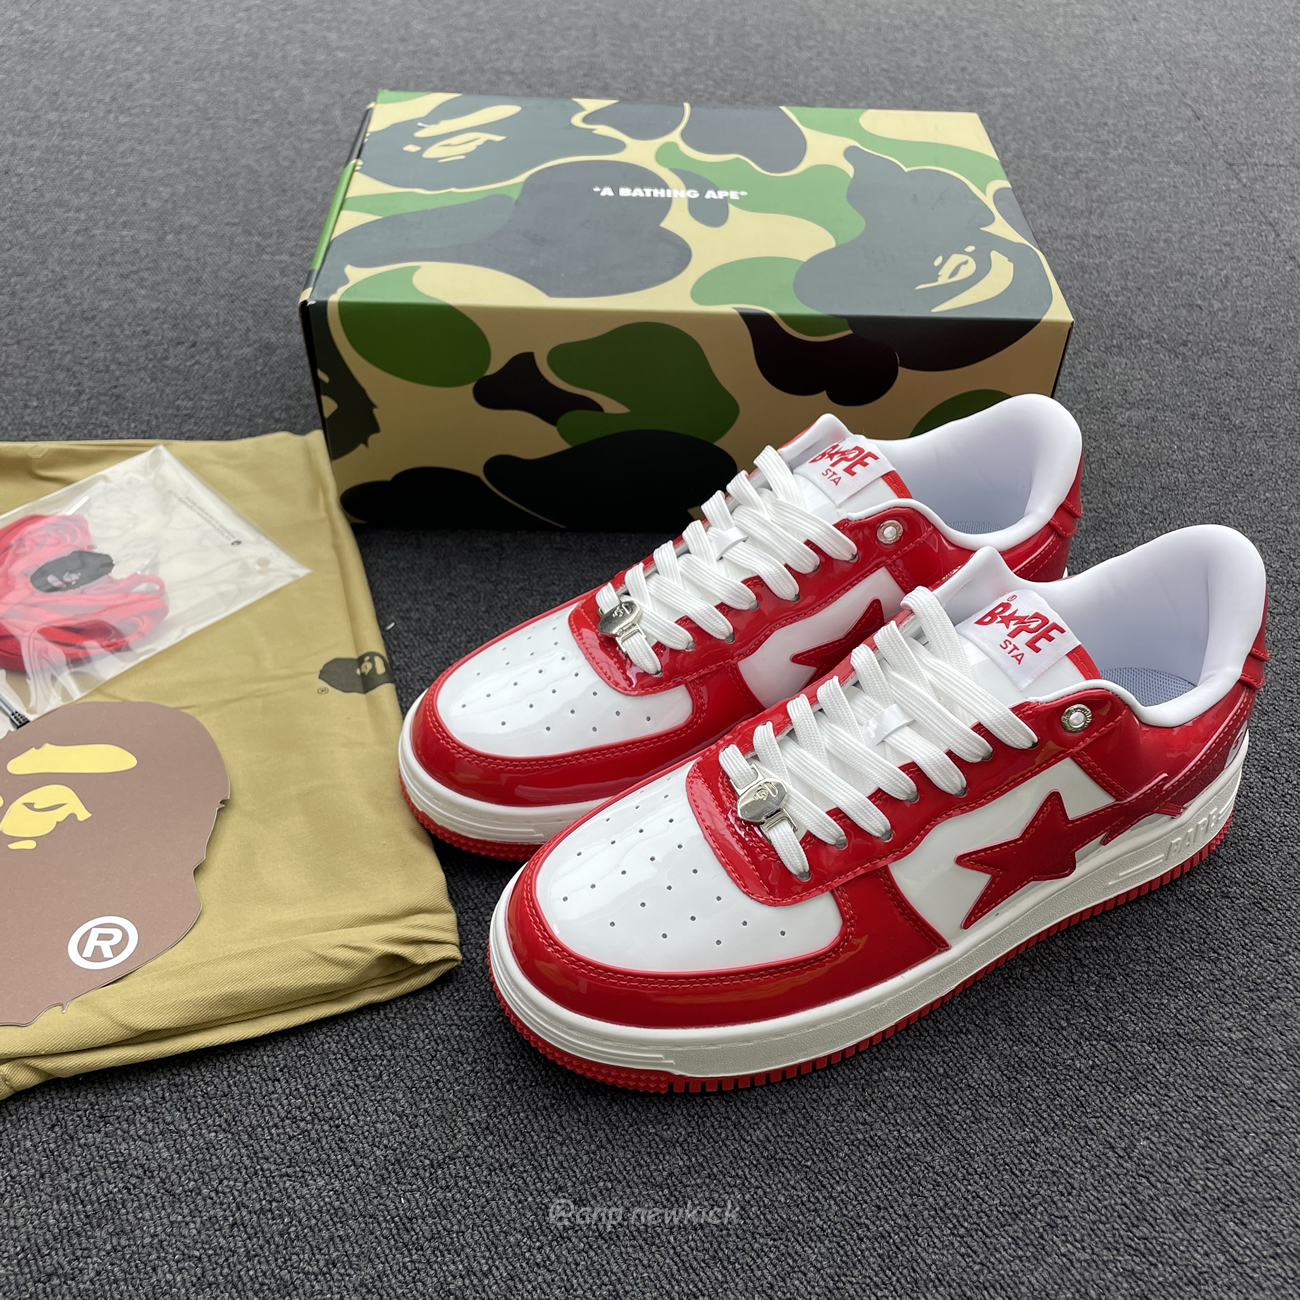 A Bathing Ape Bape Sta Patent Leather White Red 1i70 291 021 (6) - www.newkick.org